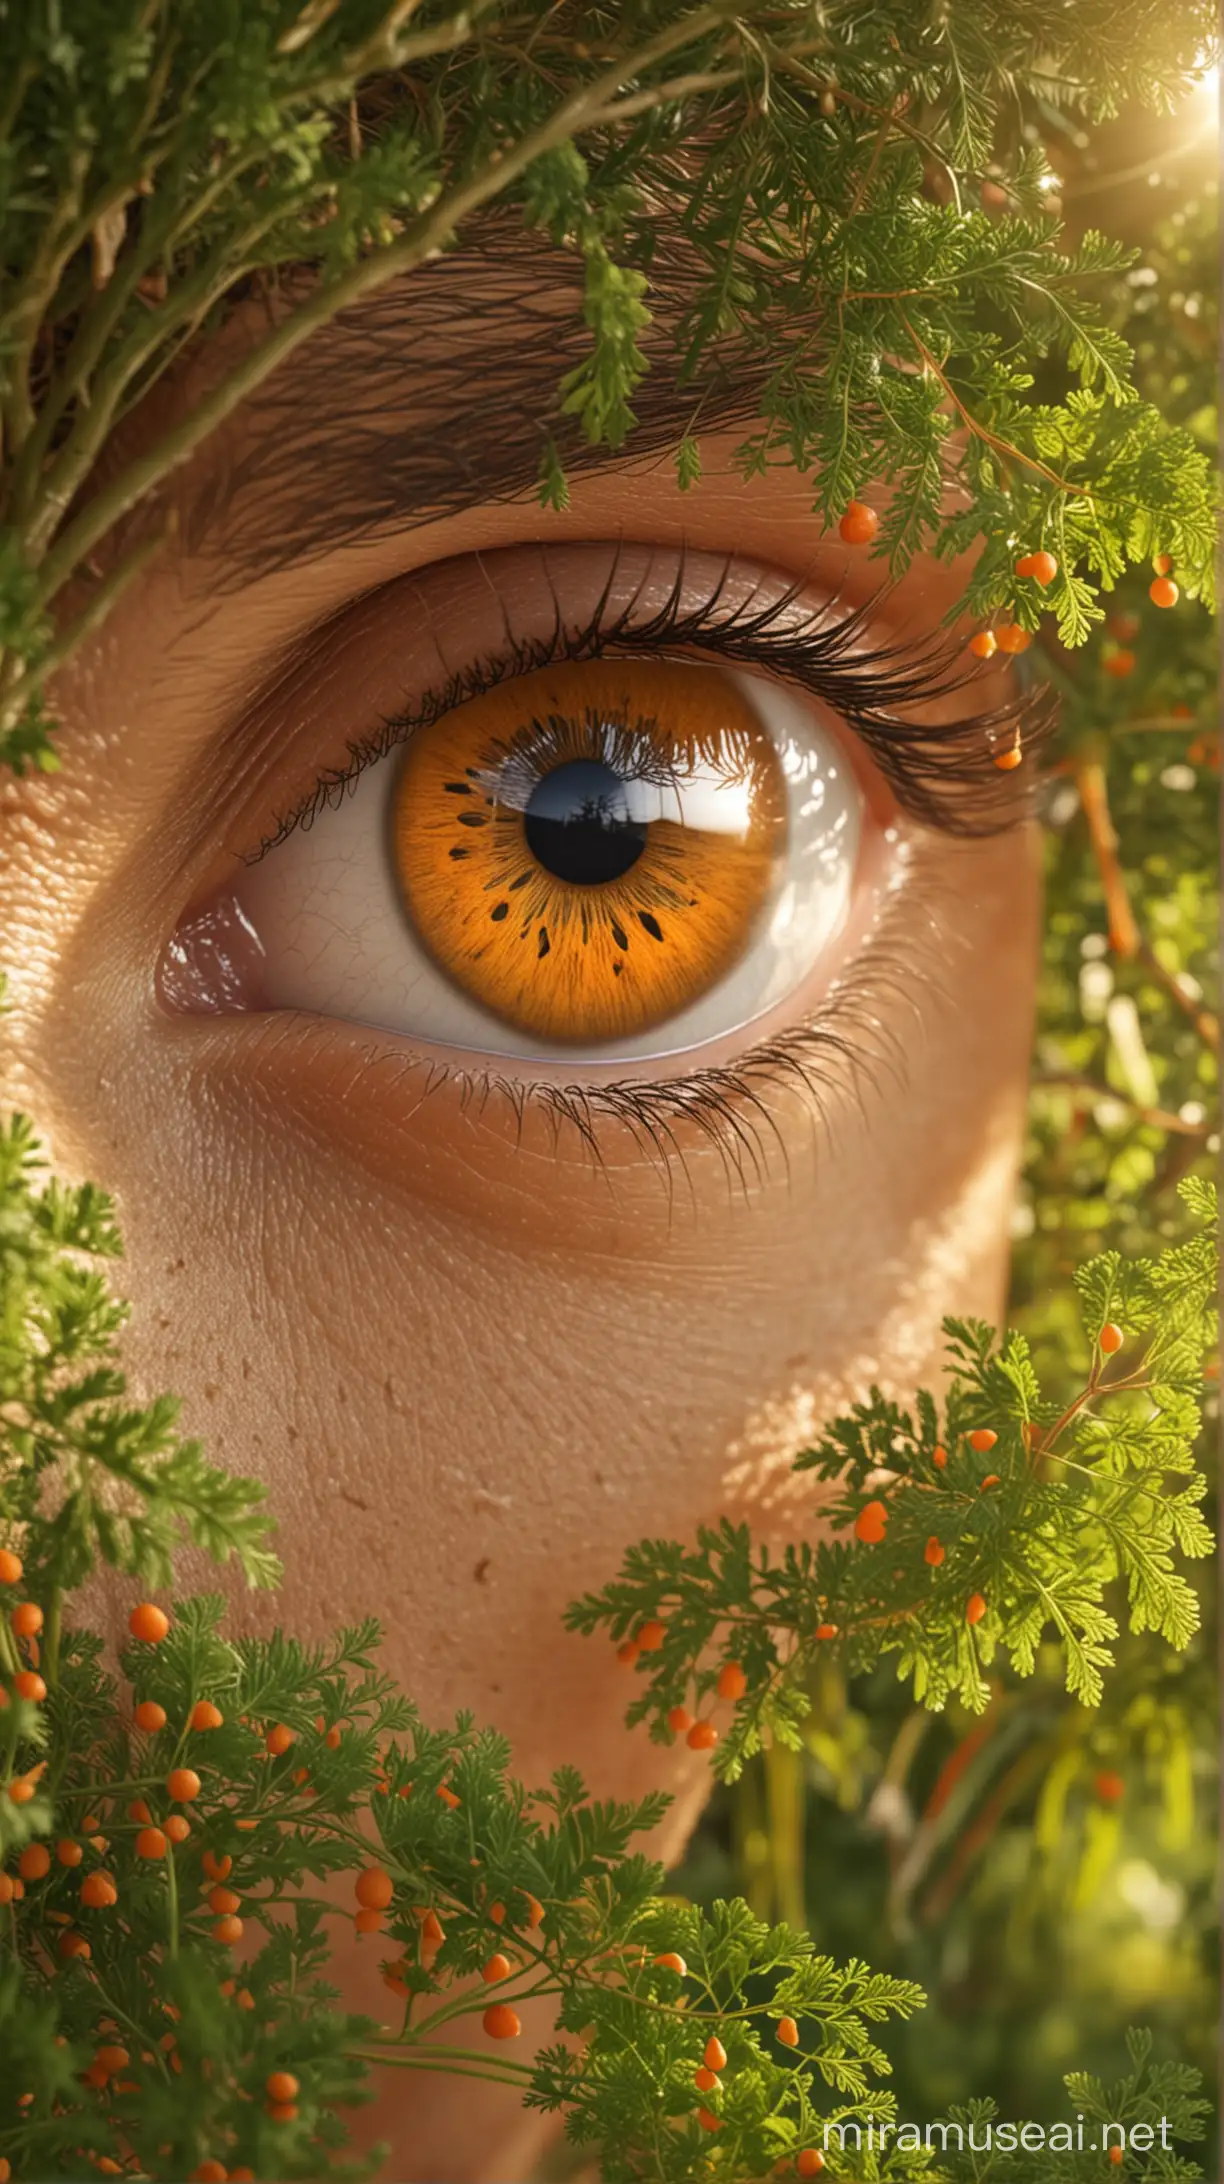 eyes diagram and in background carrot tree, natural background, sun light effect, 4k, HDR, morning time weather